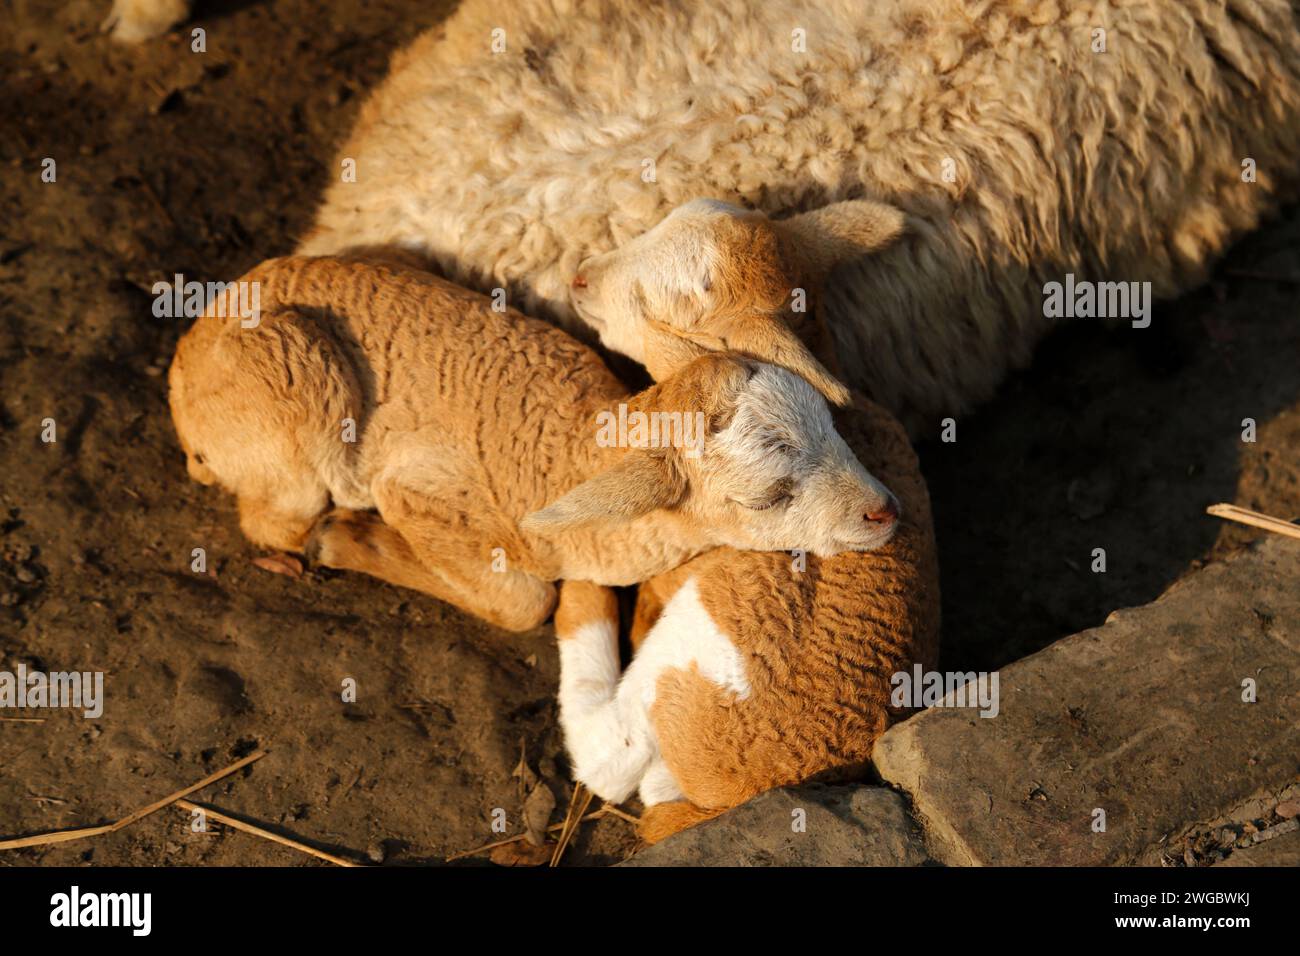 Close-up of a ewe with two lams, Bali Island in the Sunderbans, India Stock Photo